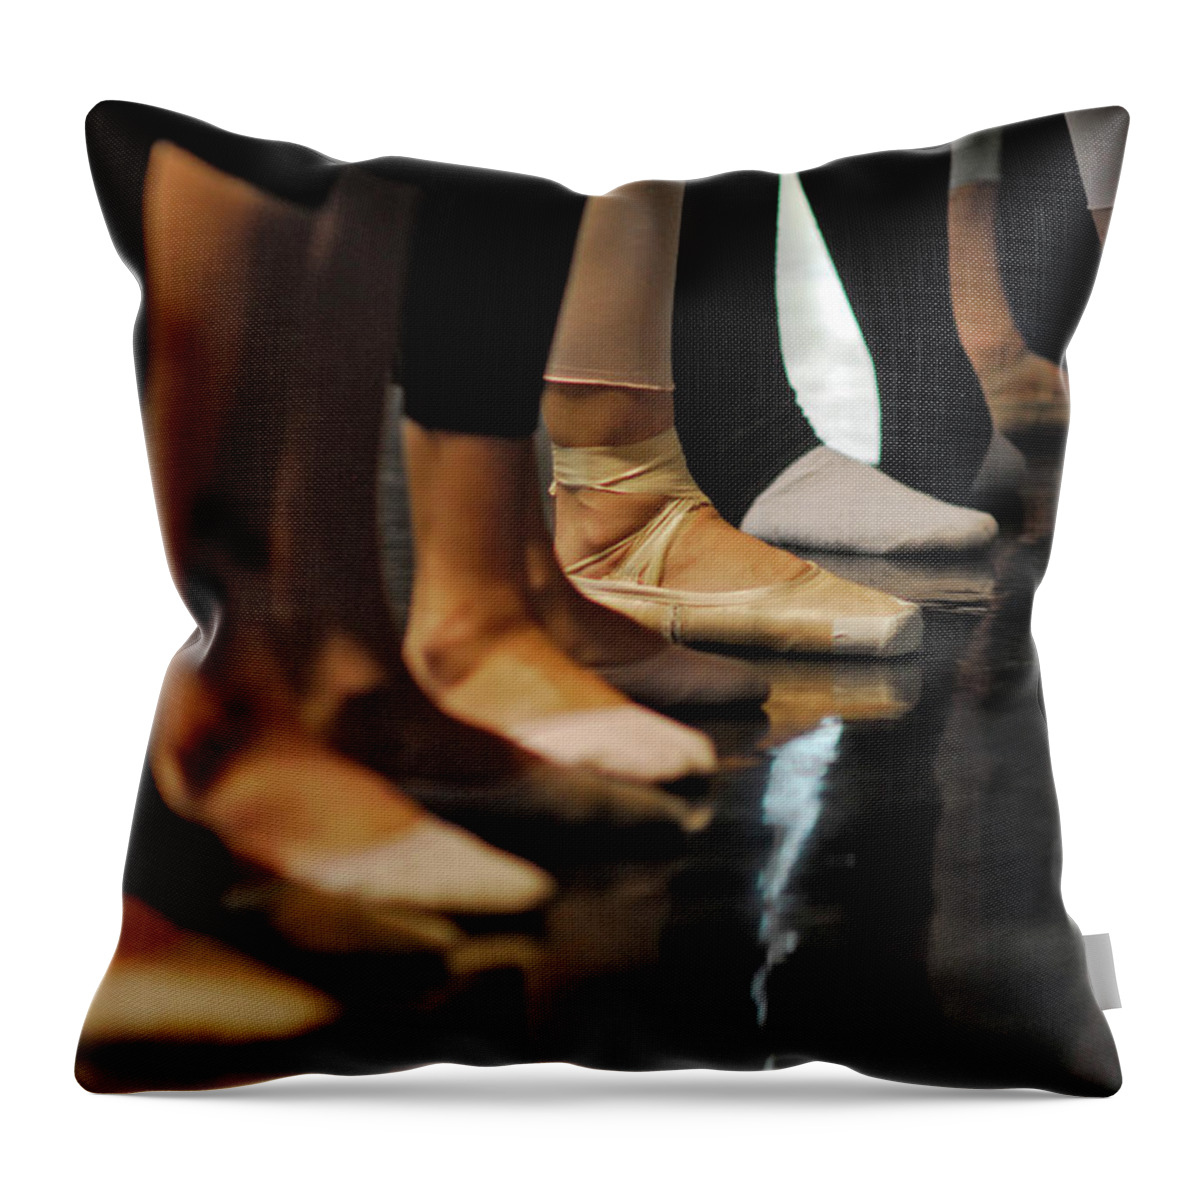 People Throw Pillow featuring the photograph Low Section View Of A Group Of People by Win-initiative/neleman